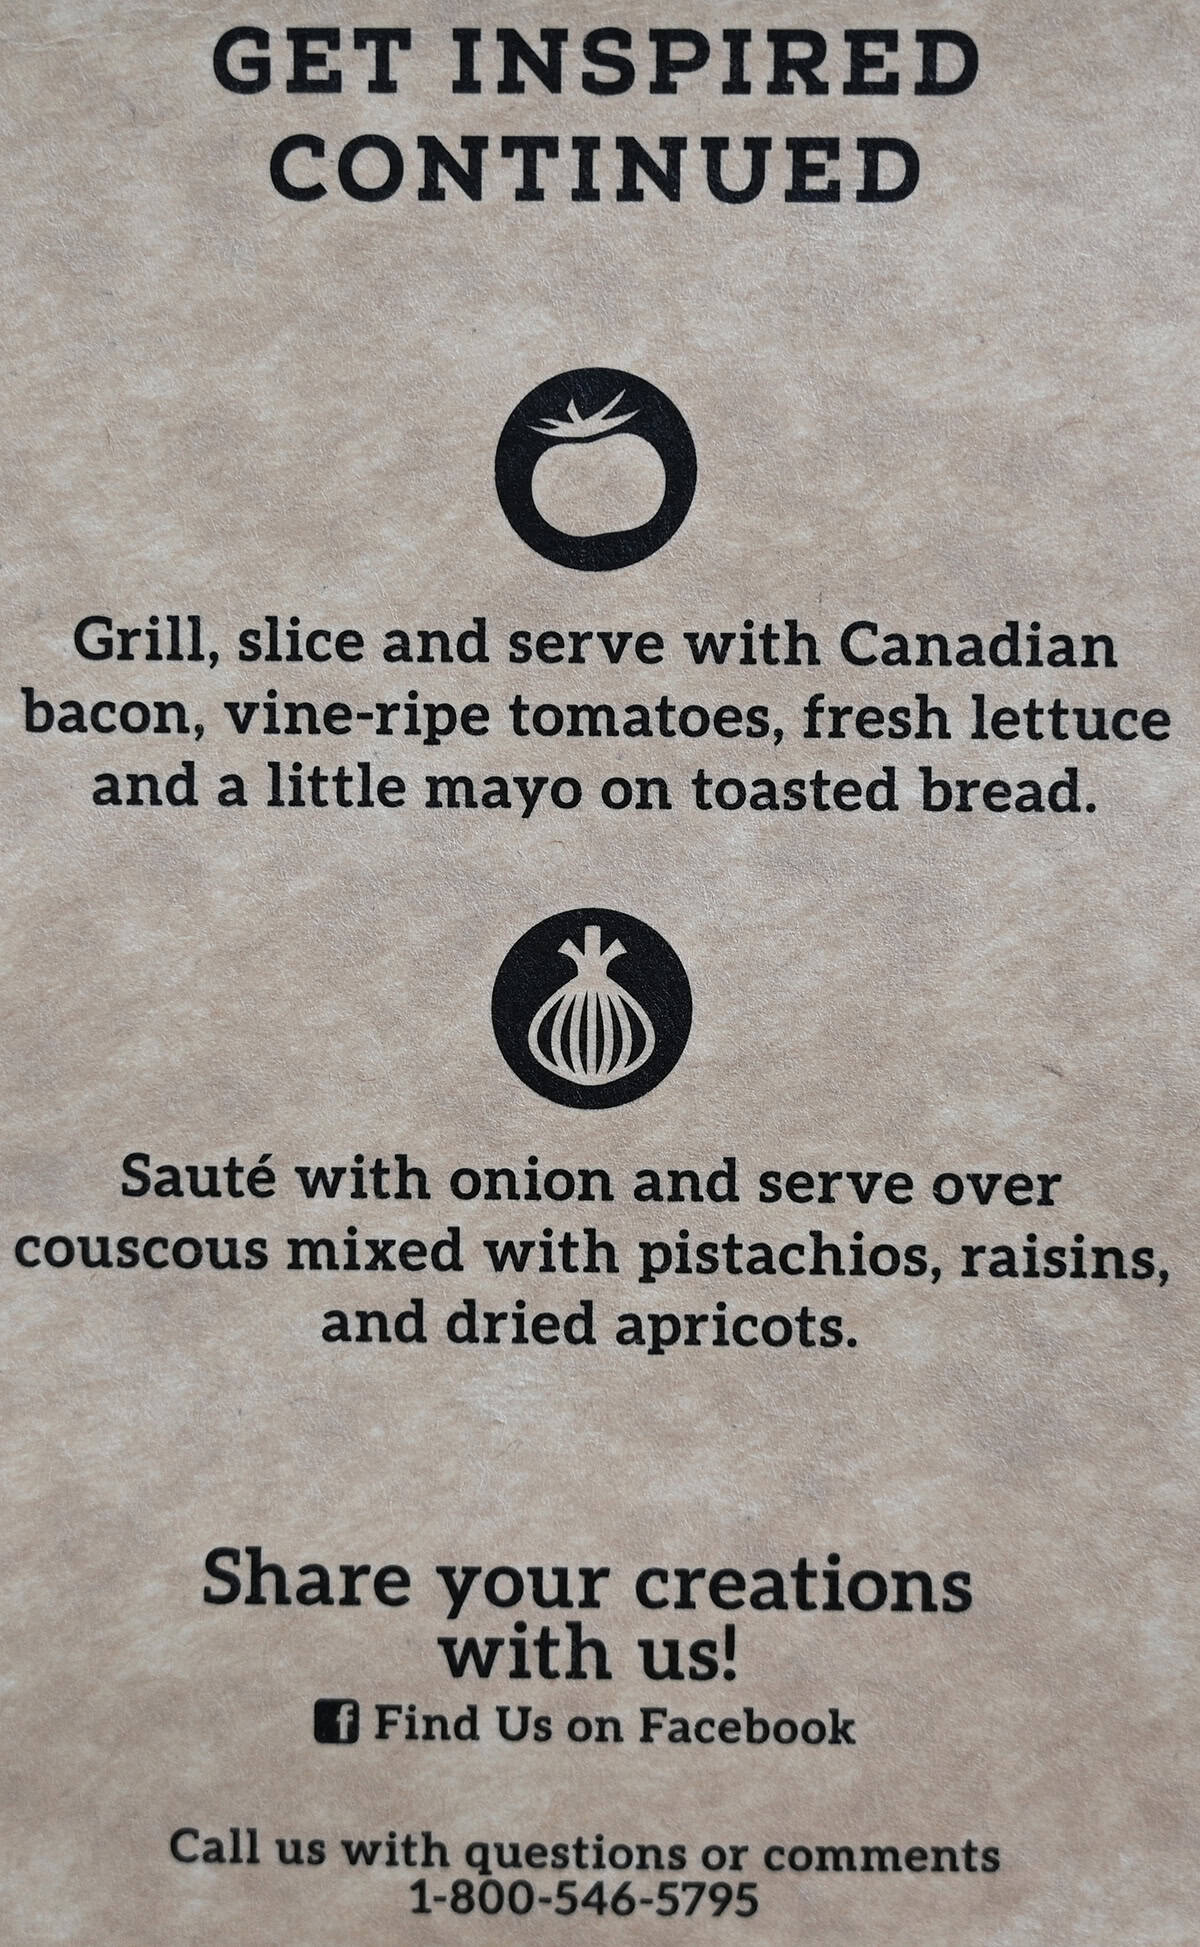 Closeup image of creative serving suggestions from the back of the package. 